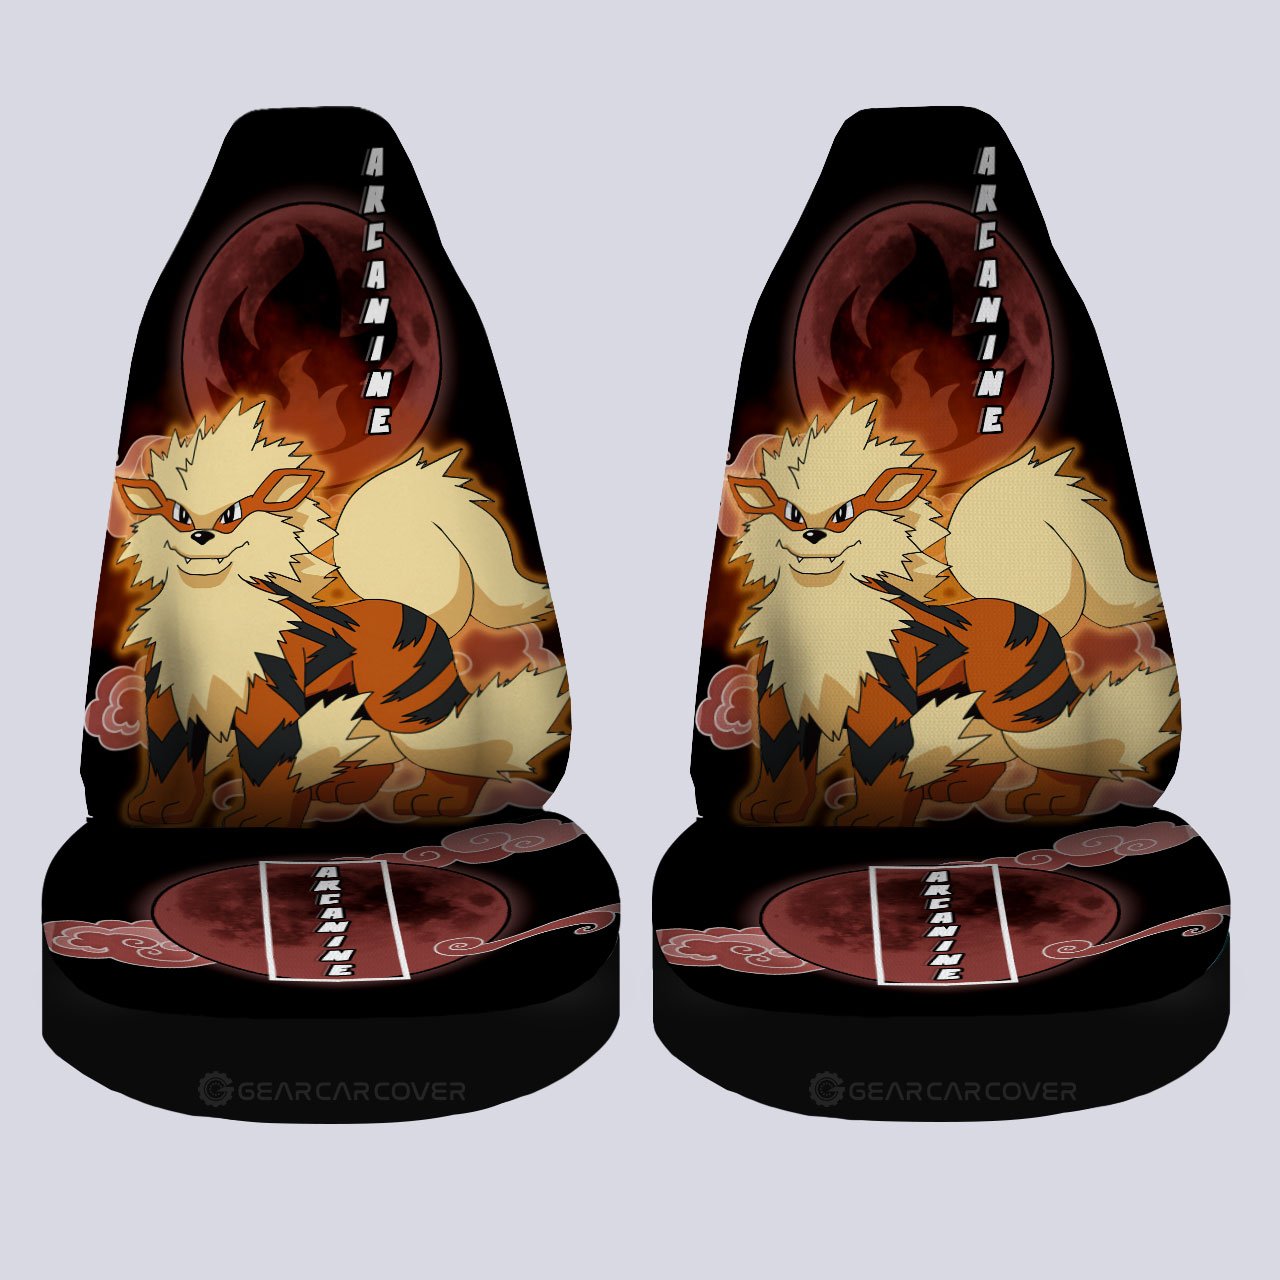 Arcanine Car Seat Covers Custom Anime Car Accessories For Anime Fans - Gearcarcover - 4